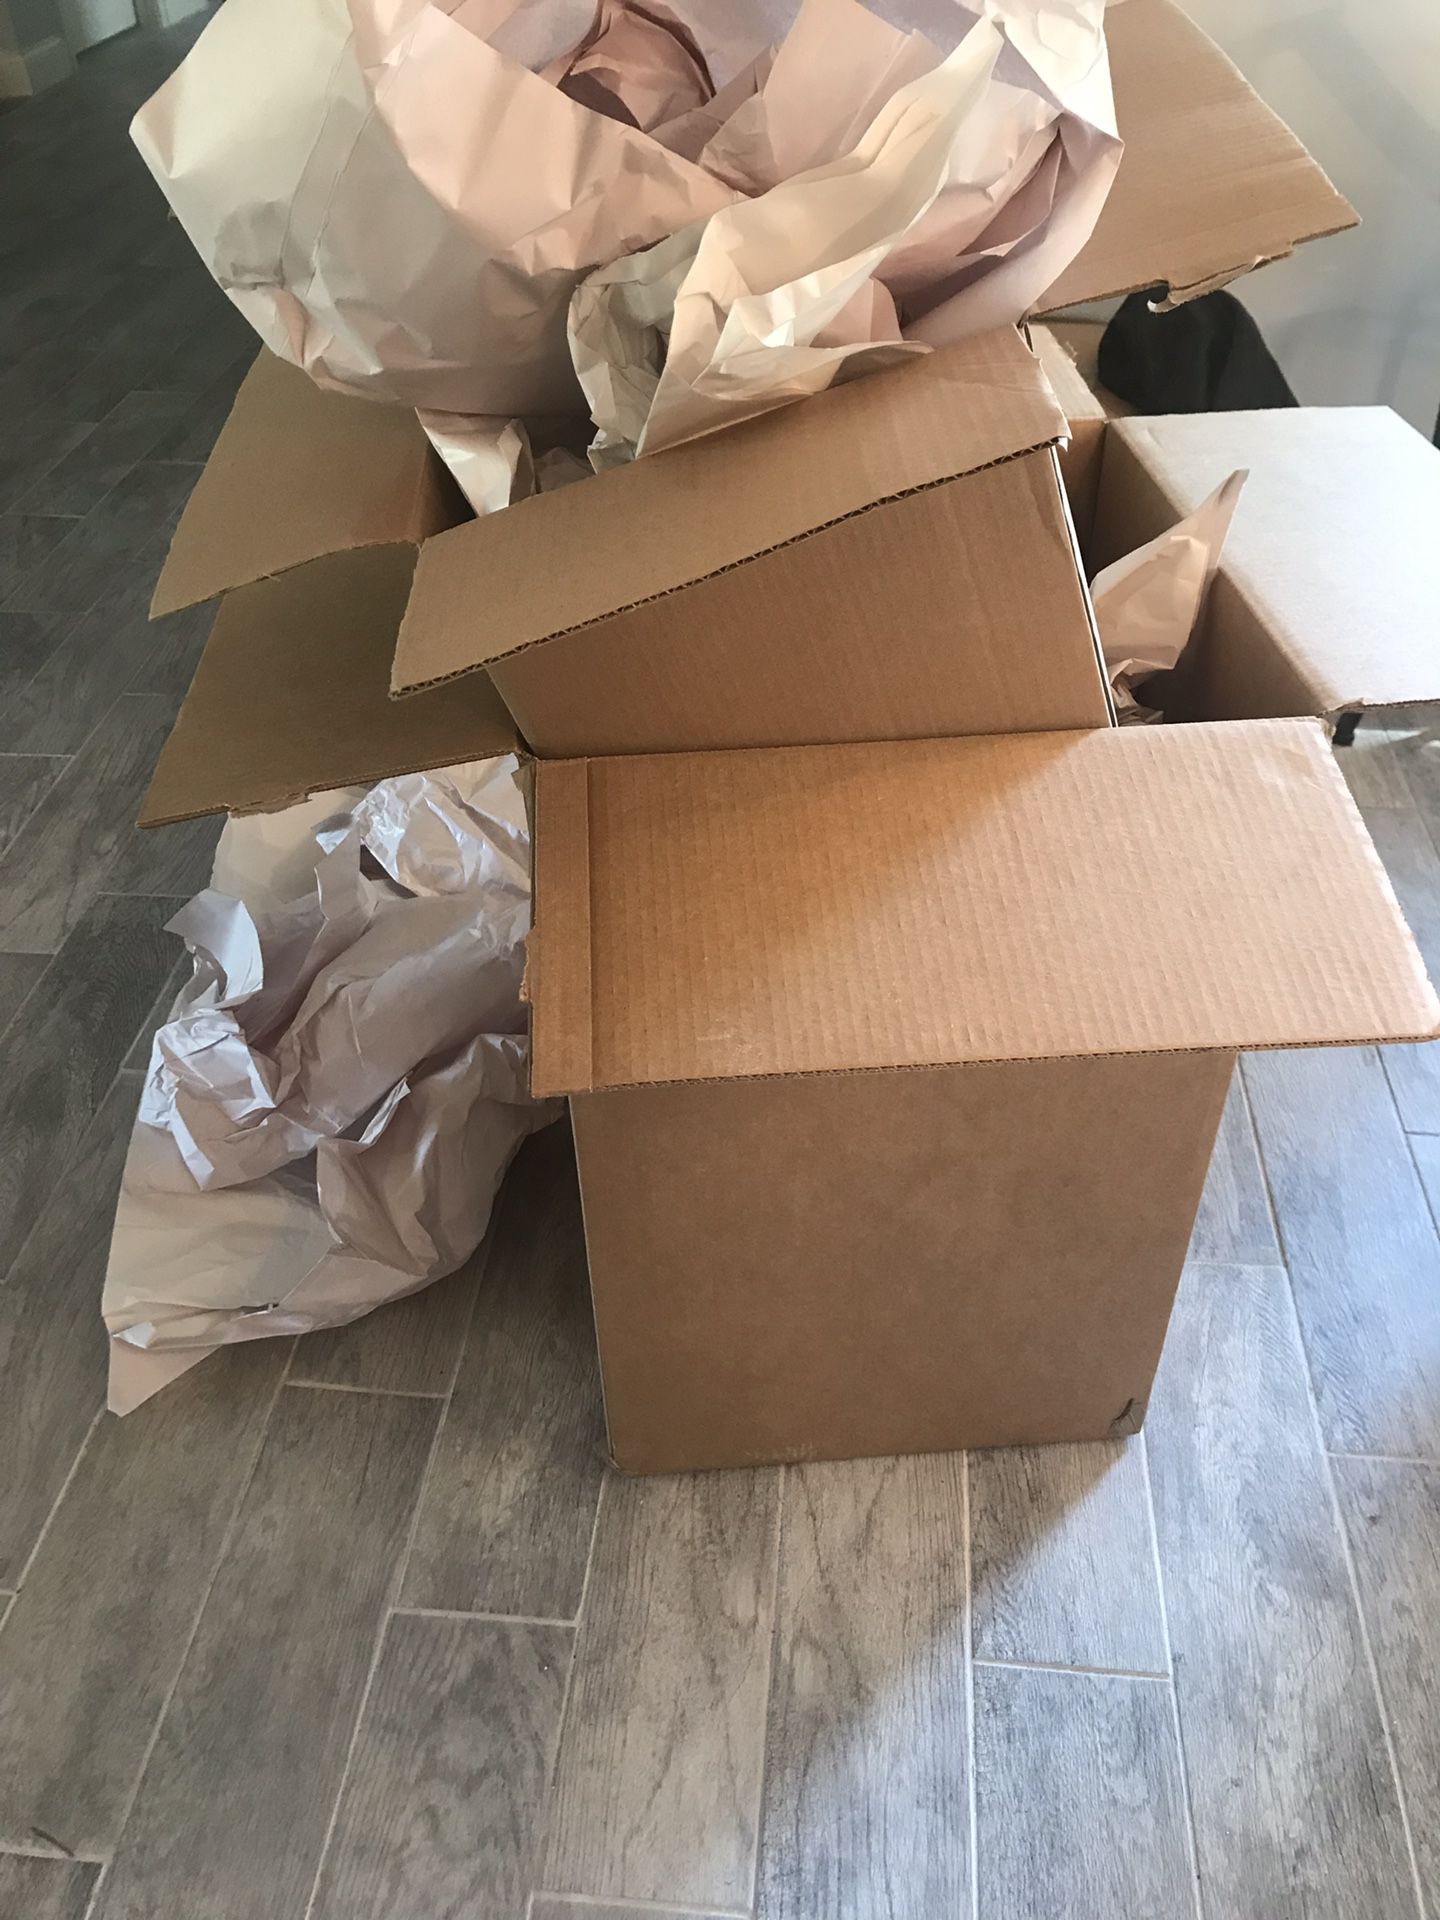 Moving/Packing boxes with paper